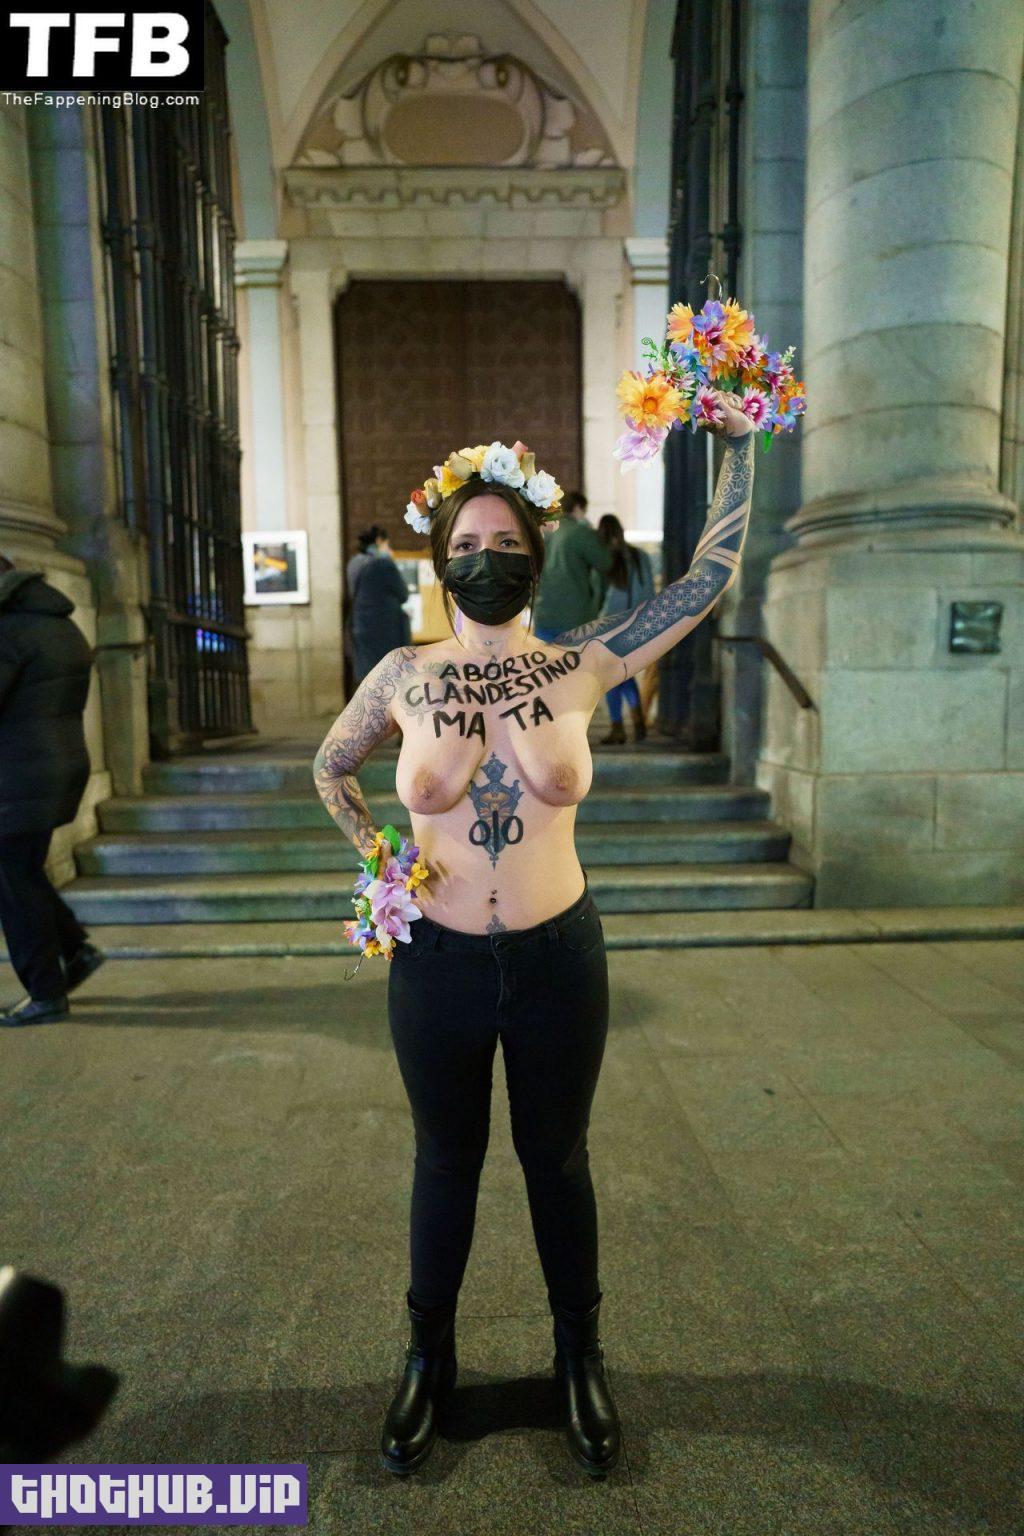 Femen Nude Protest The Fappening Blog 8